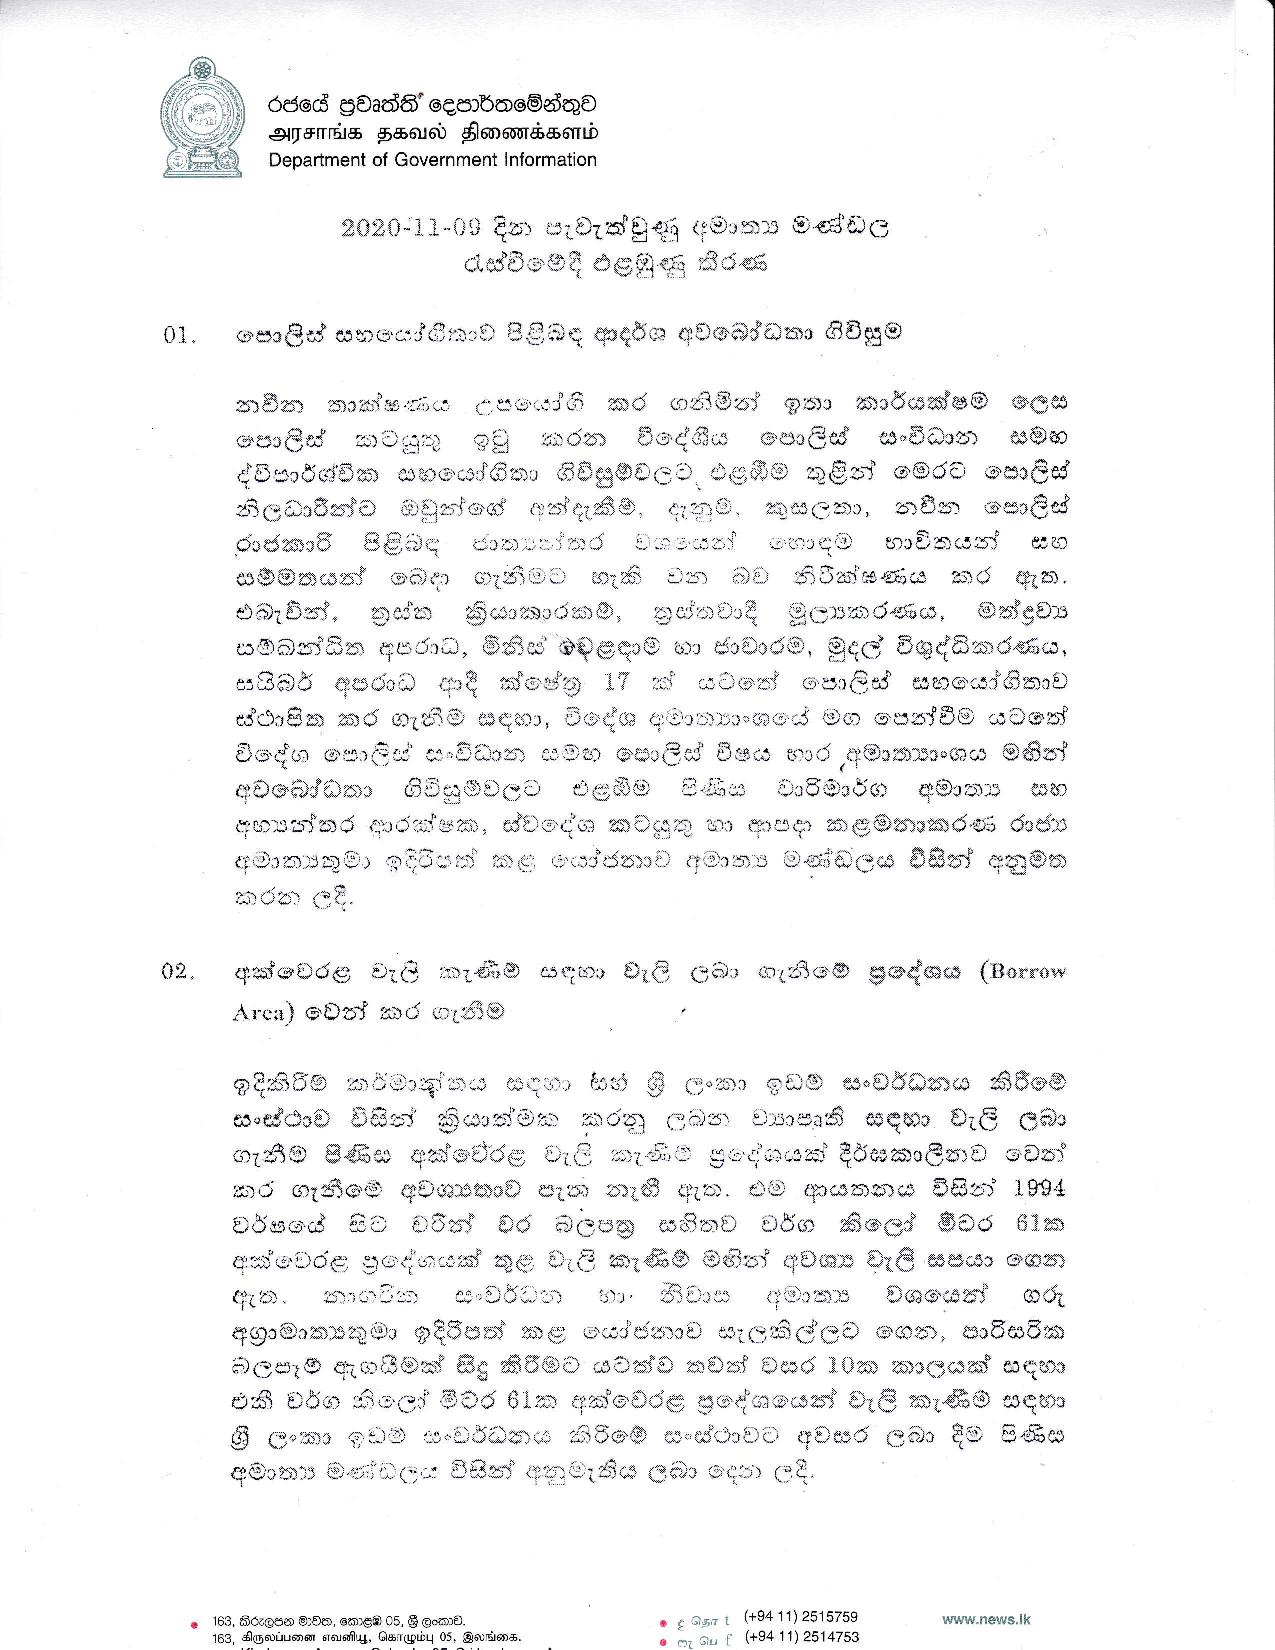 Cabinet Decision on 09.11.2020 page 001